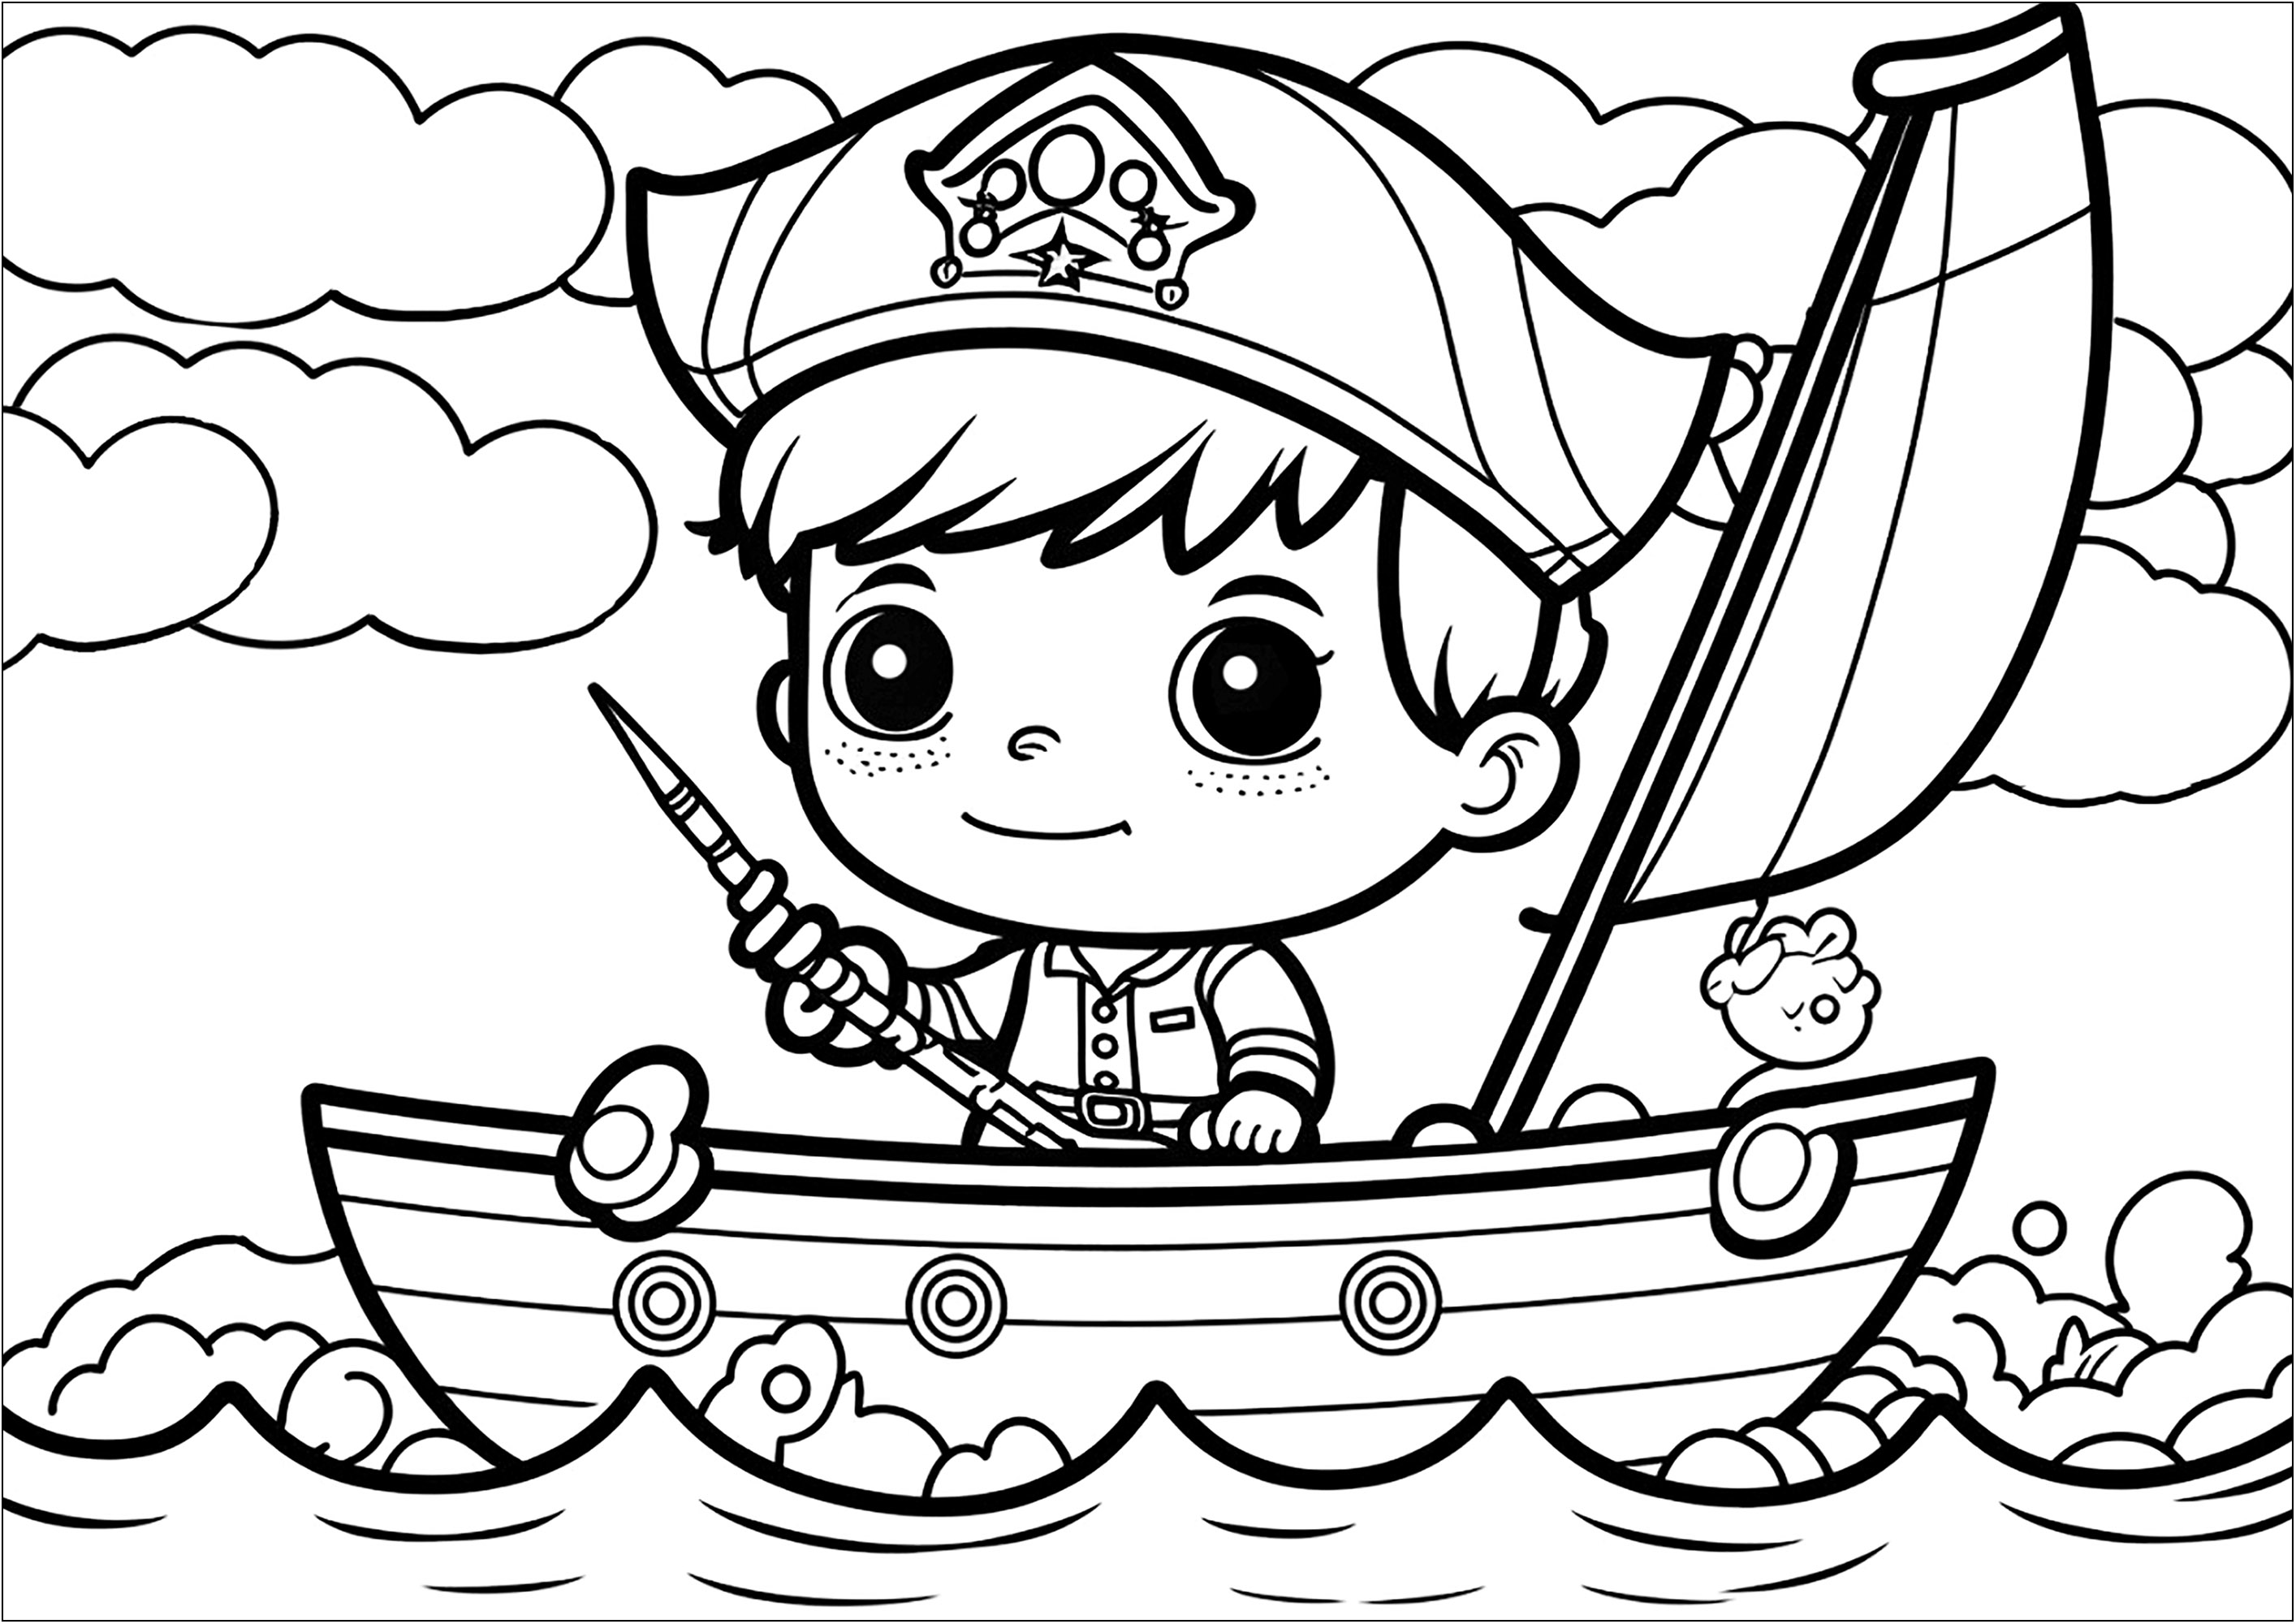 Simple coloring page of a Kawaii style pirate on his boat. This coloring page is perfect for kids who love pirates and Kawaii style! The drawing represents a little pirate smiling on top of his boat.